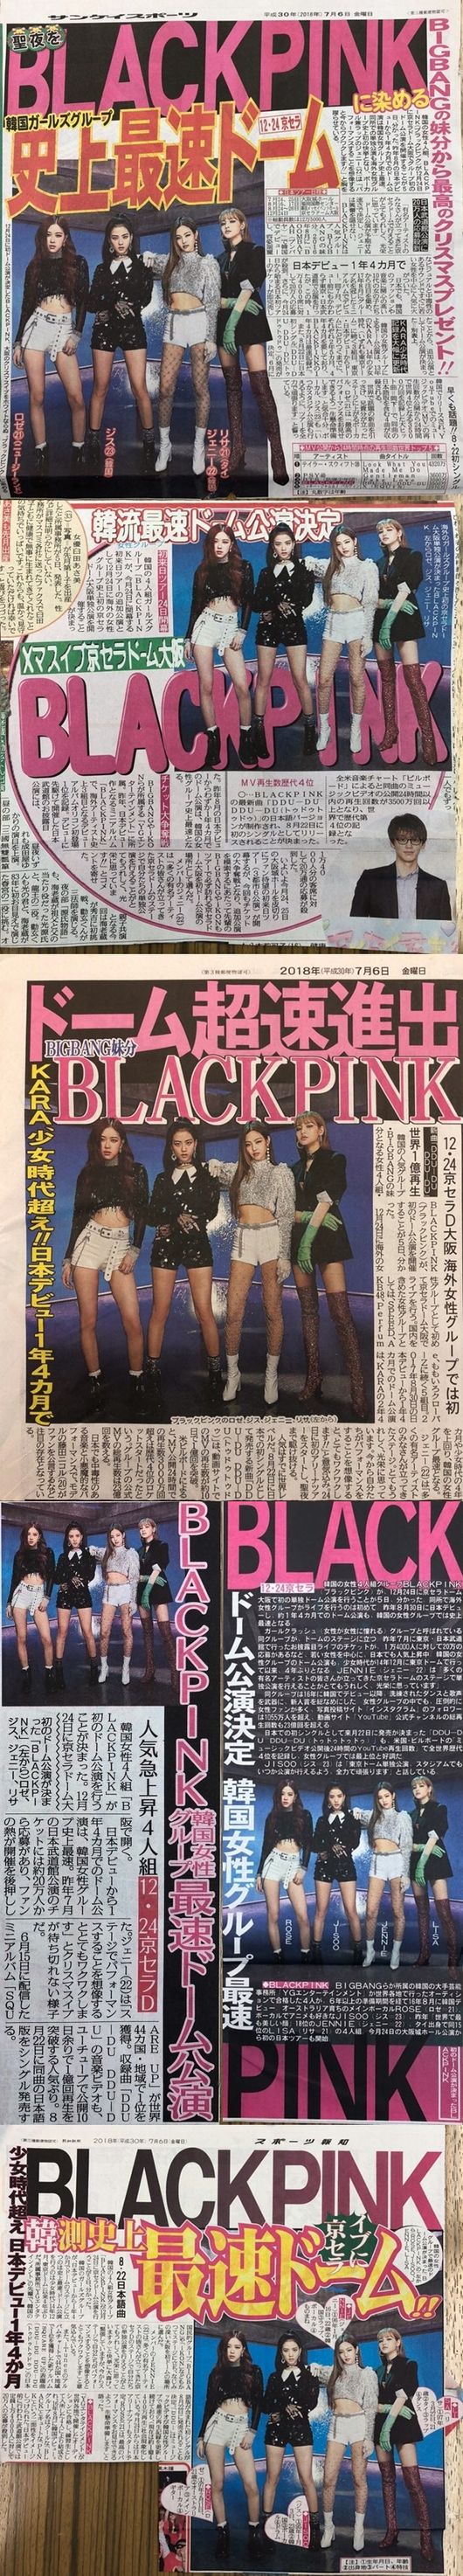 When news of BLACKPINKs entry into the Japan Kyocera dome was reported, Japan major newspapers reported this intensively.BLACKPINK has confirmed the additional performance of BLACKPINK ARENA TOUR 2018 at Japan Kyocera Dom Osaka University on December 24th.BLACKPINK, which released its official debut album in August, starting with the debut showcase in Japan last July, became the first overseas girl group to hold a performance at Kyocera Dom Osaka University in about a year and four months.The sports host caught the eye with the headline Debut 1 year and 4 months in the high-speed dome, while Sankei Sports raised expectations for the end of the year as the best Christmas gift for the big bangs brother group.The other six sports grounds, including Daily Sports, Tokyo Junichi Sports, Sports Nippon, and Nikan Sports, also made special Issues ahead of BLACKPINKs entry into the dome.In addition, on the same morning, Japans famous morning broadcast TBS wide show Hayadoki also noted the remarkable performance of BLACKPINK.BLACKPINK members said in a short interview, I will prepare the best performances for you to enjoy. Please look forward to it.Prior to the Kyocera Dome performance, BLACKPINK will hold seven performances in three cities at the Fukuoka International Center on August 16-17 and the Makuhari Messe Event Hall on August 24-26, starting with the Osaka University Hall on July 24-25.Although Japan is also receiving a hot response, BLACKPINKs popularity is spreading worldwide.The British Metro recently reported that the BLACKPINK Tududududududududududu music video was ranked second in the worlds music video history, which was the most popular 24-hour public release after Taylor Swifts Look What You Made Me Do, along with YouTube Official Data.Following this momentum, the music video of Toudoudu has set the shortest record in all K-pop men and women groups, breaking 150 million views on YouTube today (7th), seven hours after its release on the 21st.It shortened the previous record by three days and proved once again the presence of BLACKPINK.BLACKPINK will challenge eight gold medals in MBCs Show! Music Center today (7th). On the 8th, she will appear on SBSs Popular Song and continue her myth of sweeping music broadcasting trophies.YG Entertainment.